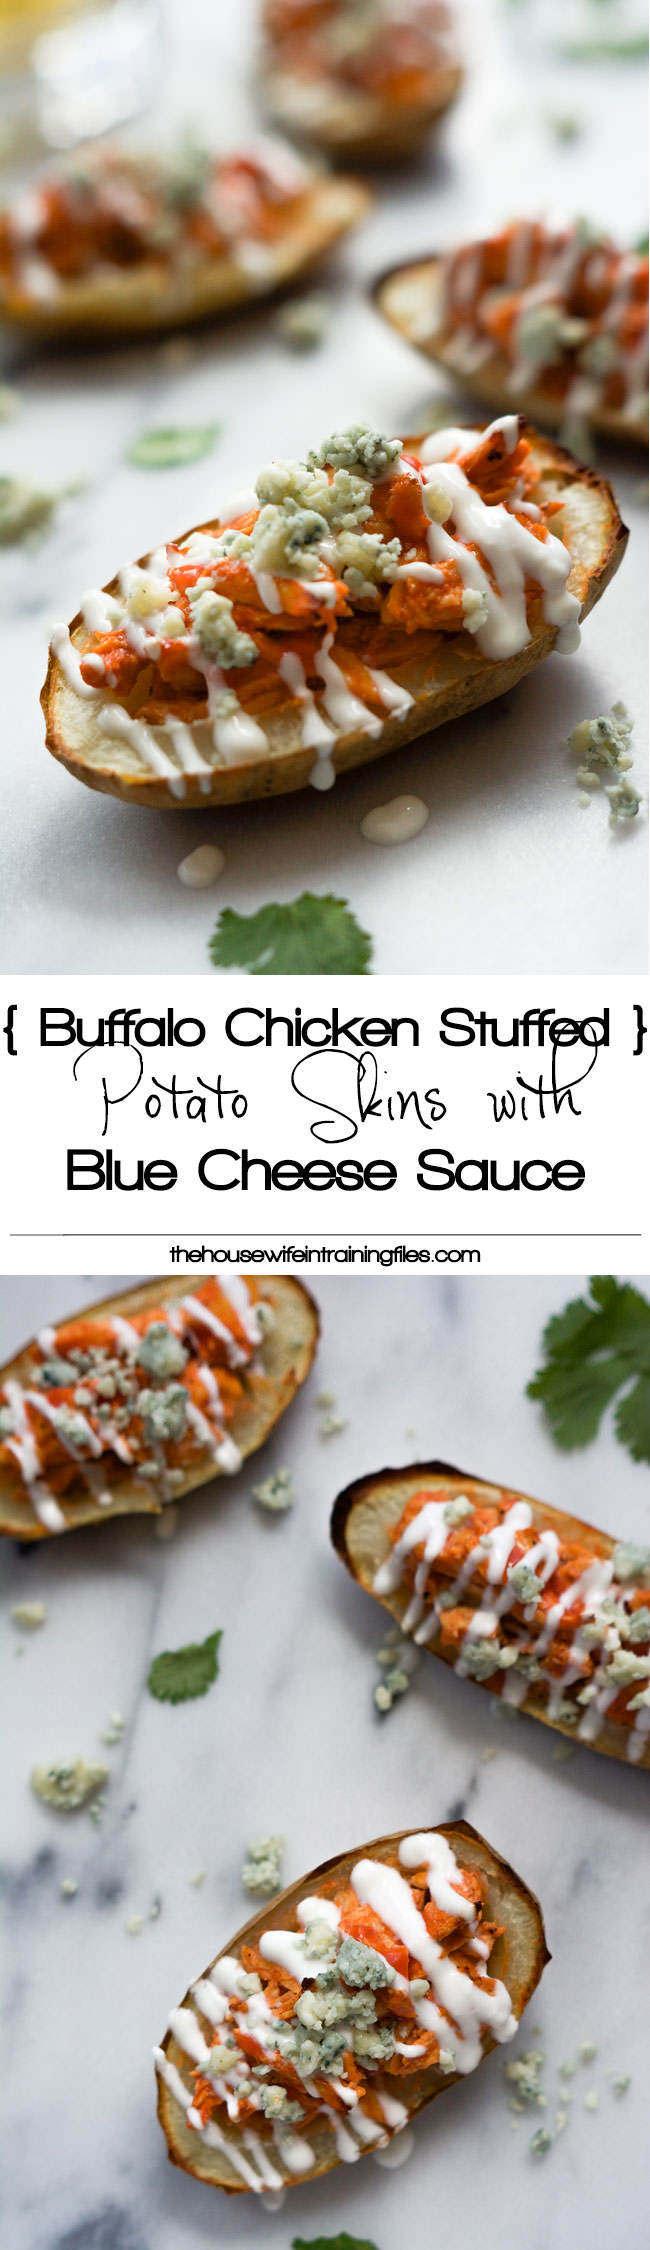 Buffalo Chicken Stuffed Potato Skins with Honey Blue Cheese Sauce are the perfect party food! Spicy shredded chicken loaded onto a crispy potato skin and drizzled with a homemade blue cheese sauce! #potatoskins #buffalo #appetizer #glutenfree